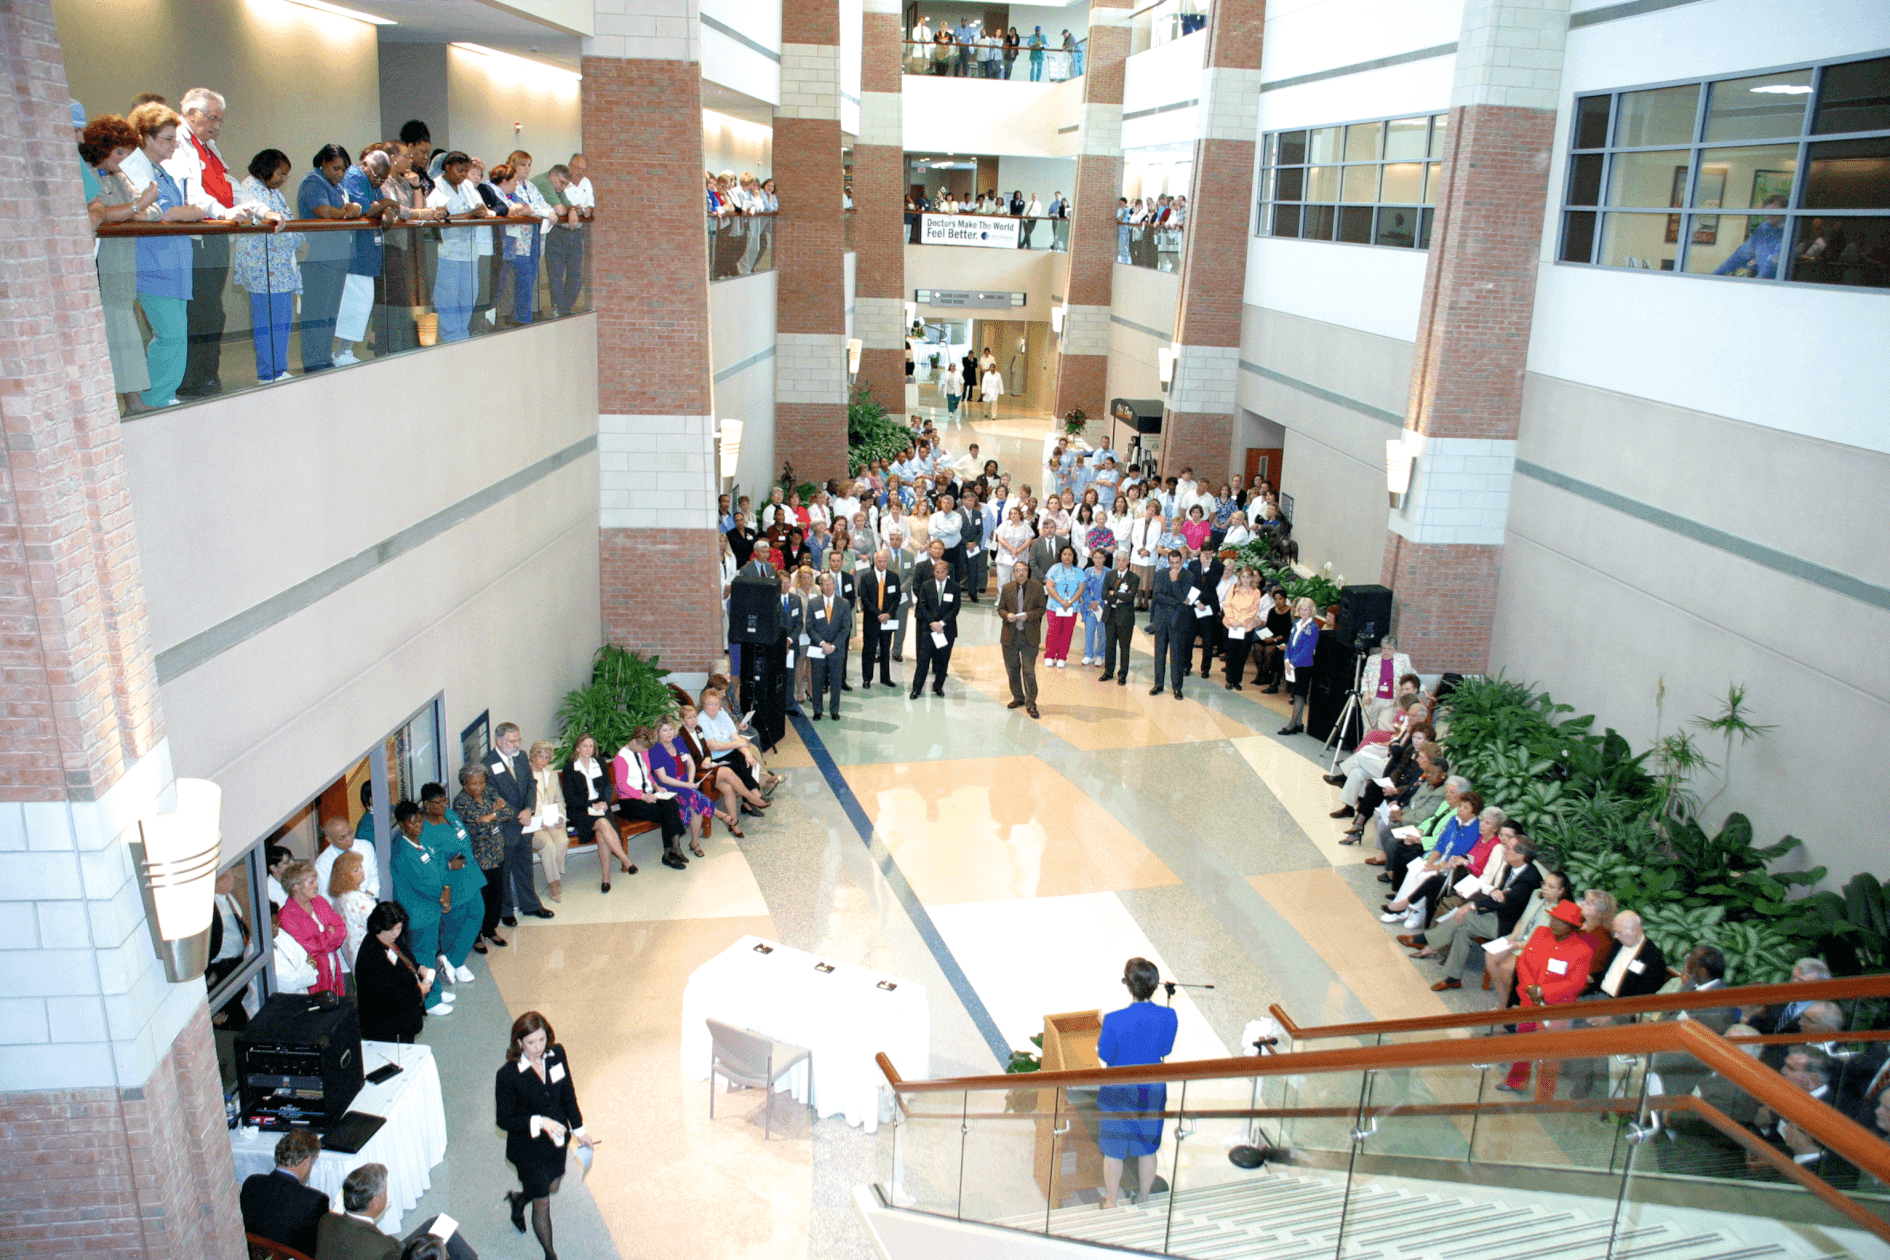 Staff gather at the ceremony